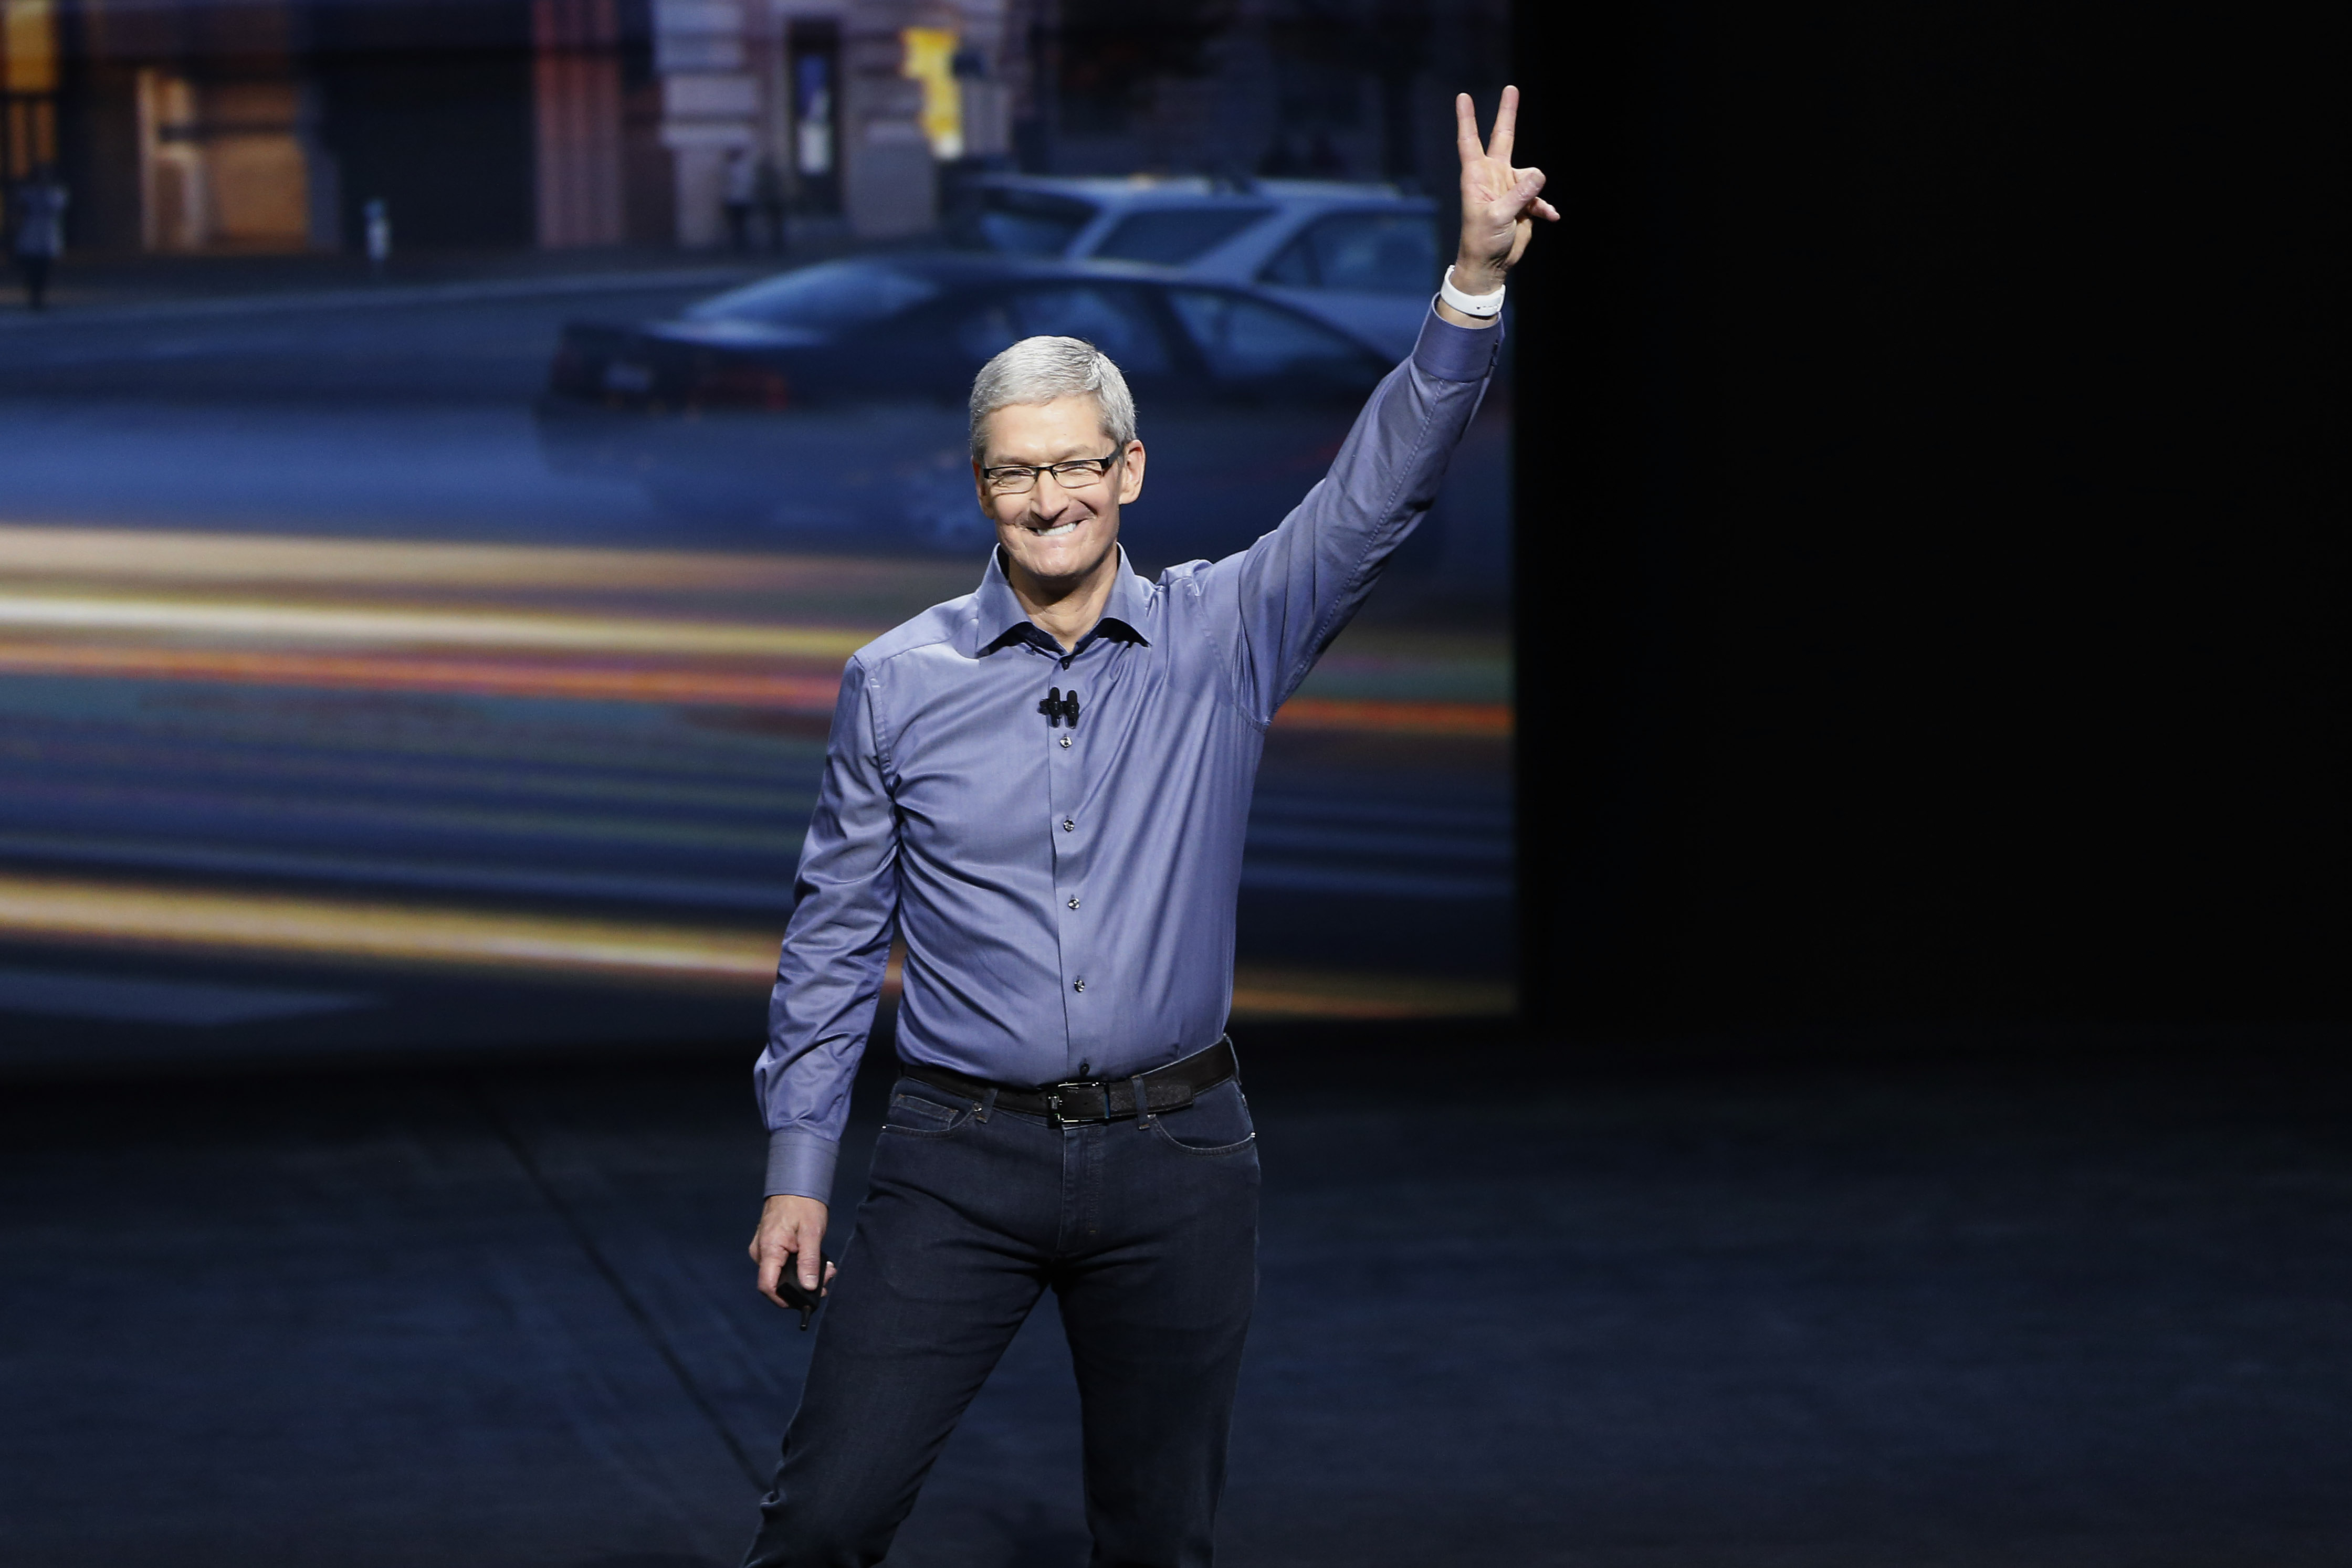 Apple CEO Tim Cook waves as he arrives on stage during an Apple Special Event on at Bill Graham Civic Auditorium September 9, 2015 in San Francisco, California. (Stephen Lam&mdash;Getty Images)